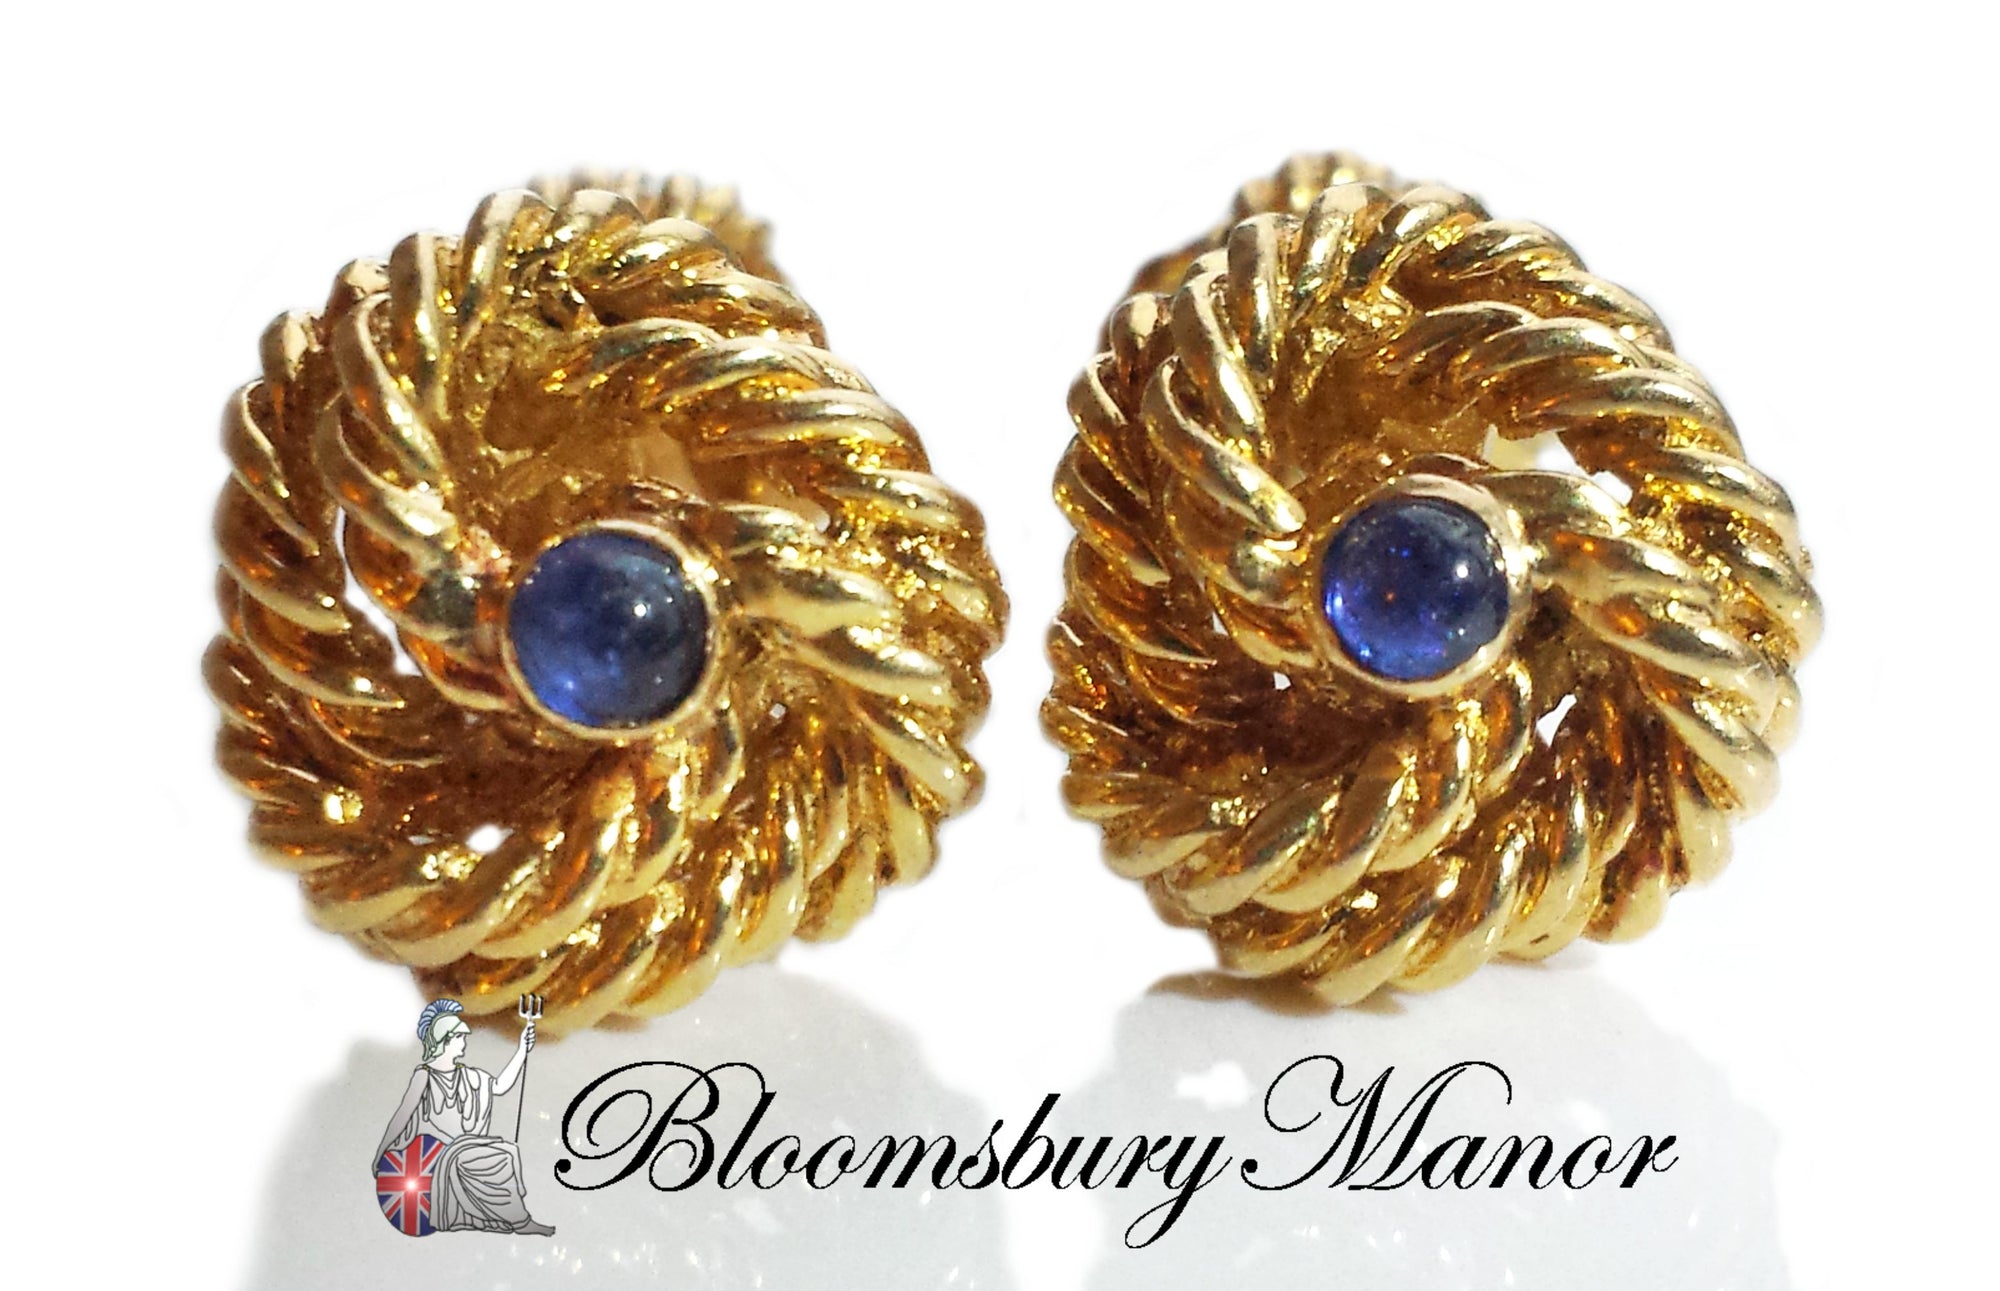 Vintage 1960s Tiffany & Co Cufflinks with Cabochon Sapphire